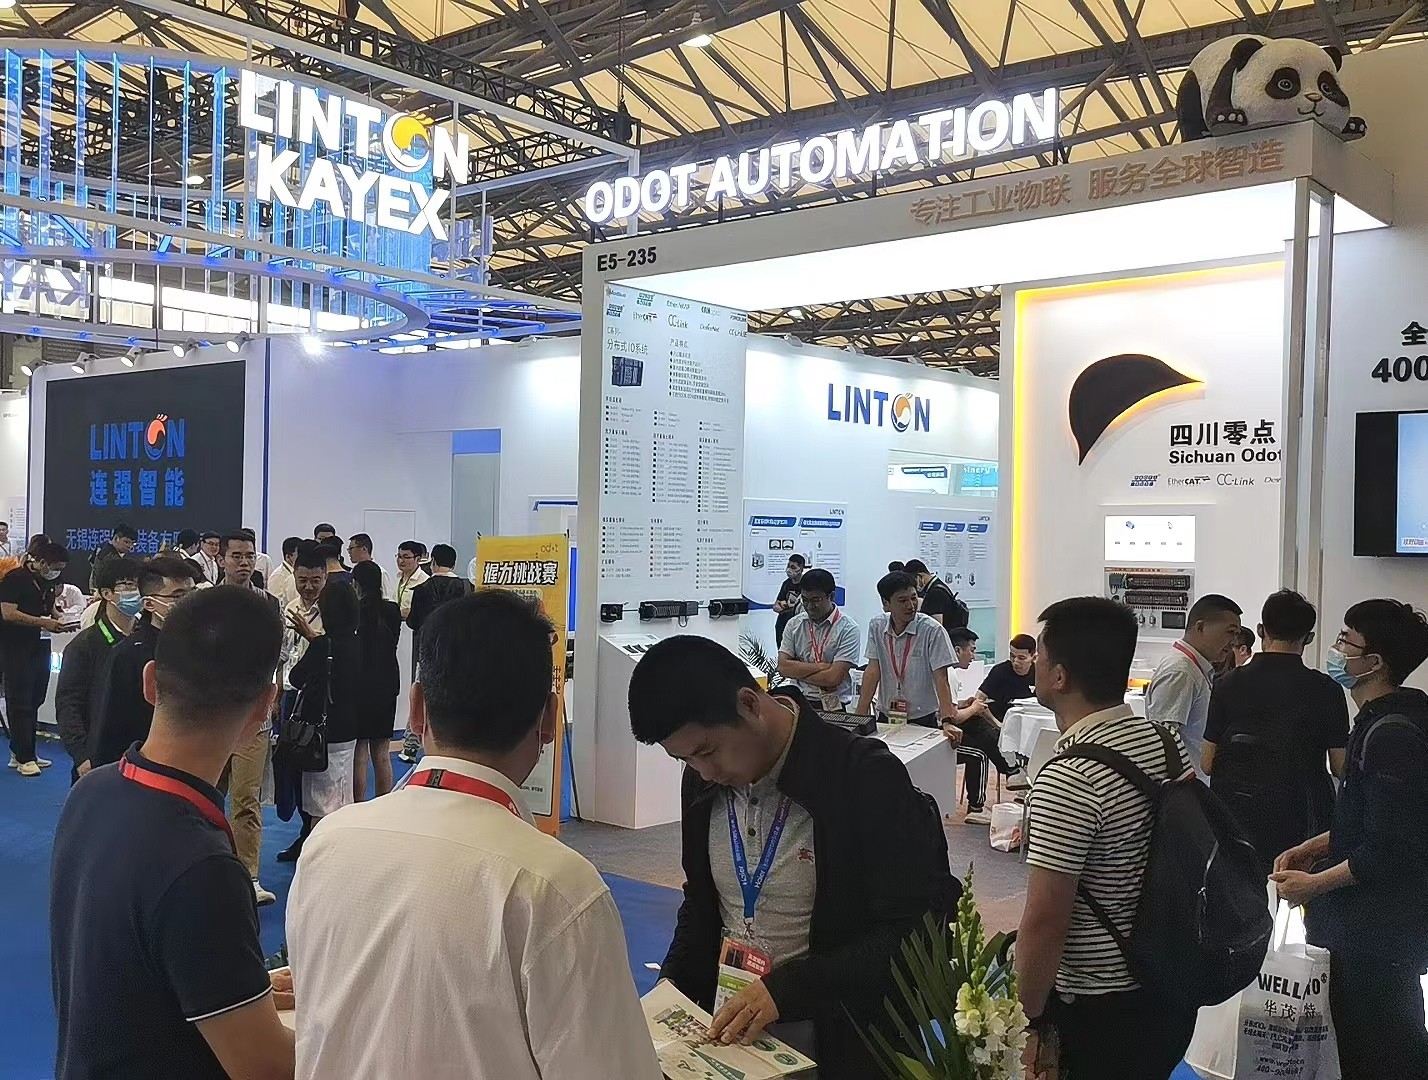 The 7th Shanghai International Tourism and Homestay Industry Expo in 2024 - www.globalomp.com